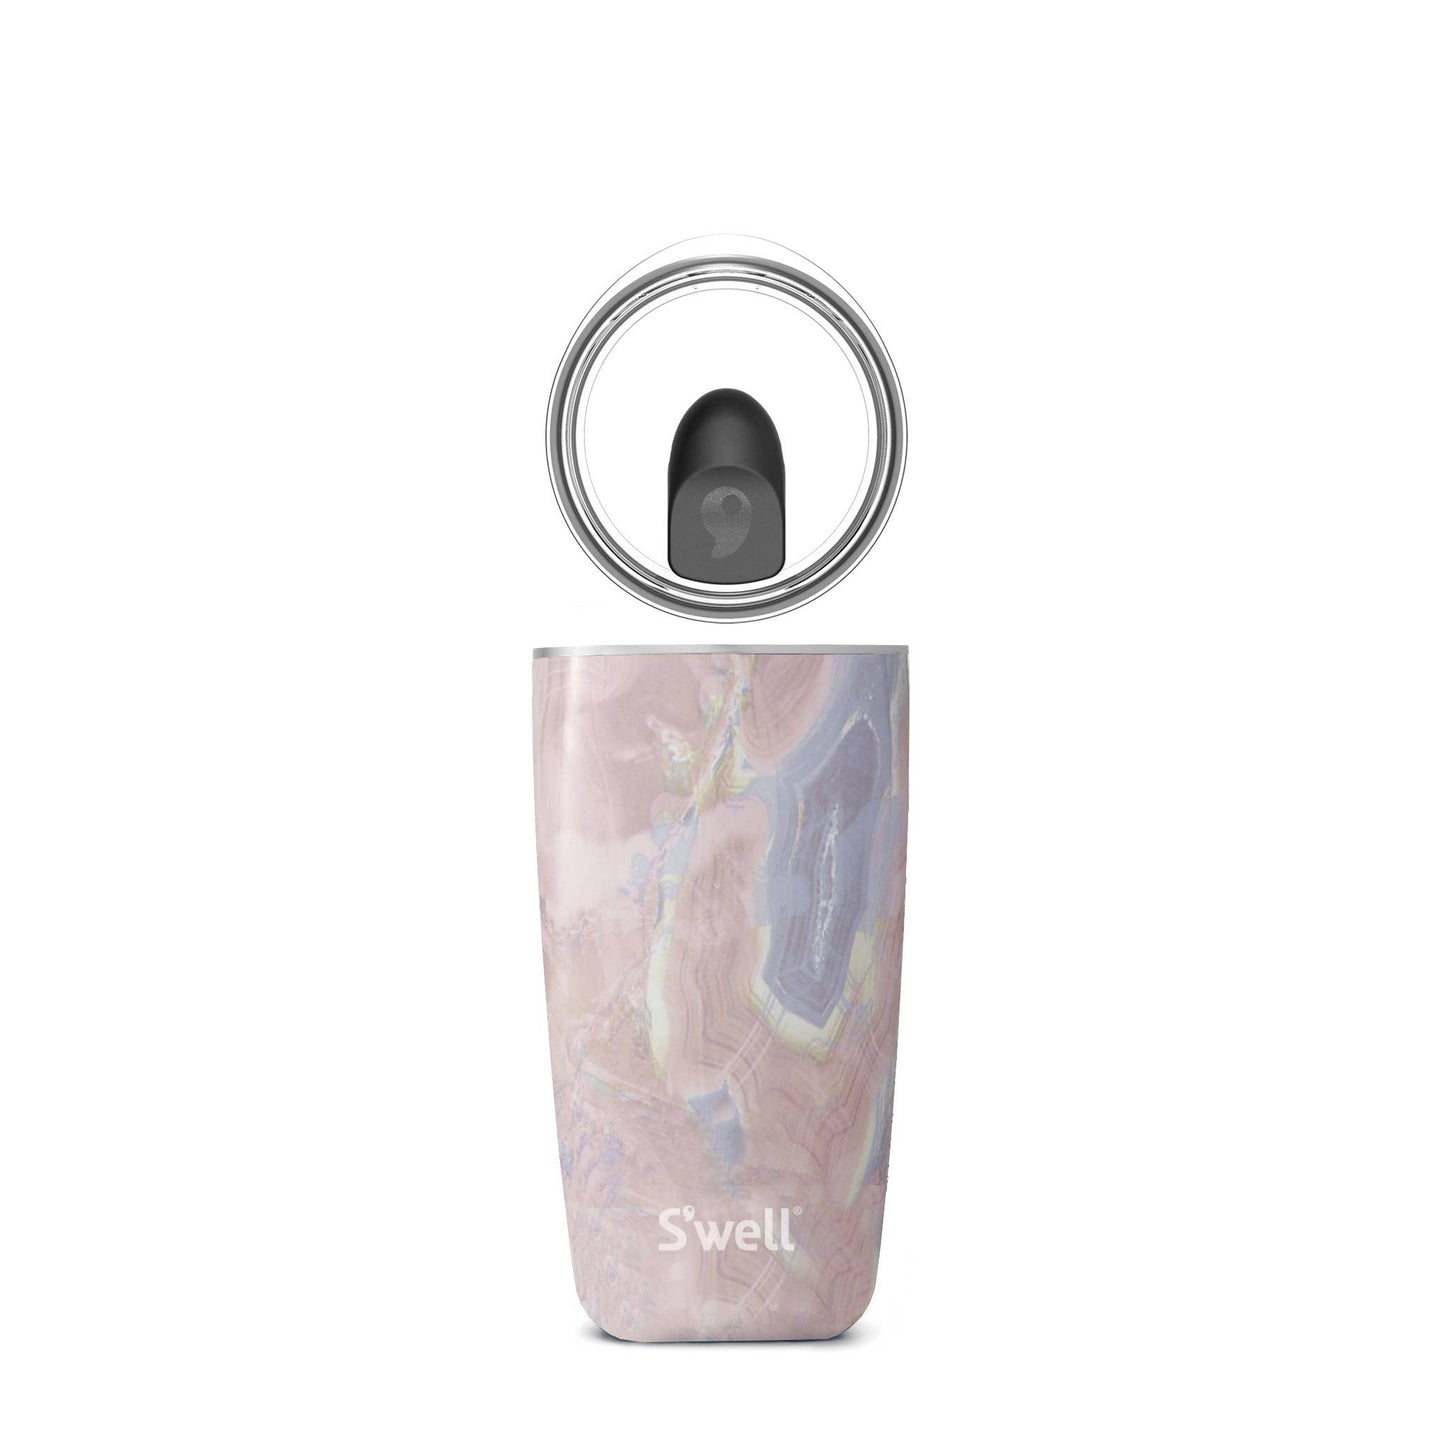 S'Well - Stainless Steel Tumbler with Lid - Geode Rose  S'well   -better made easy-eco-friendly-sustainable-gifting